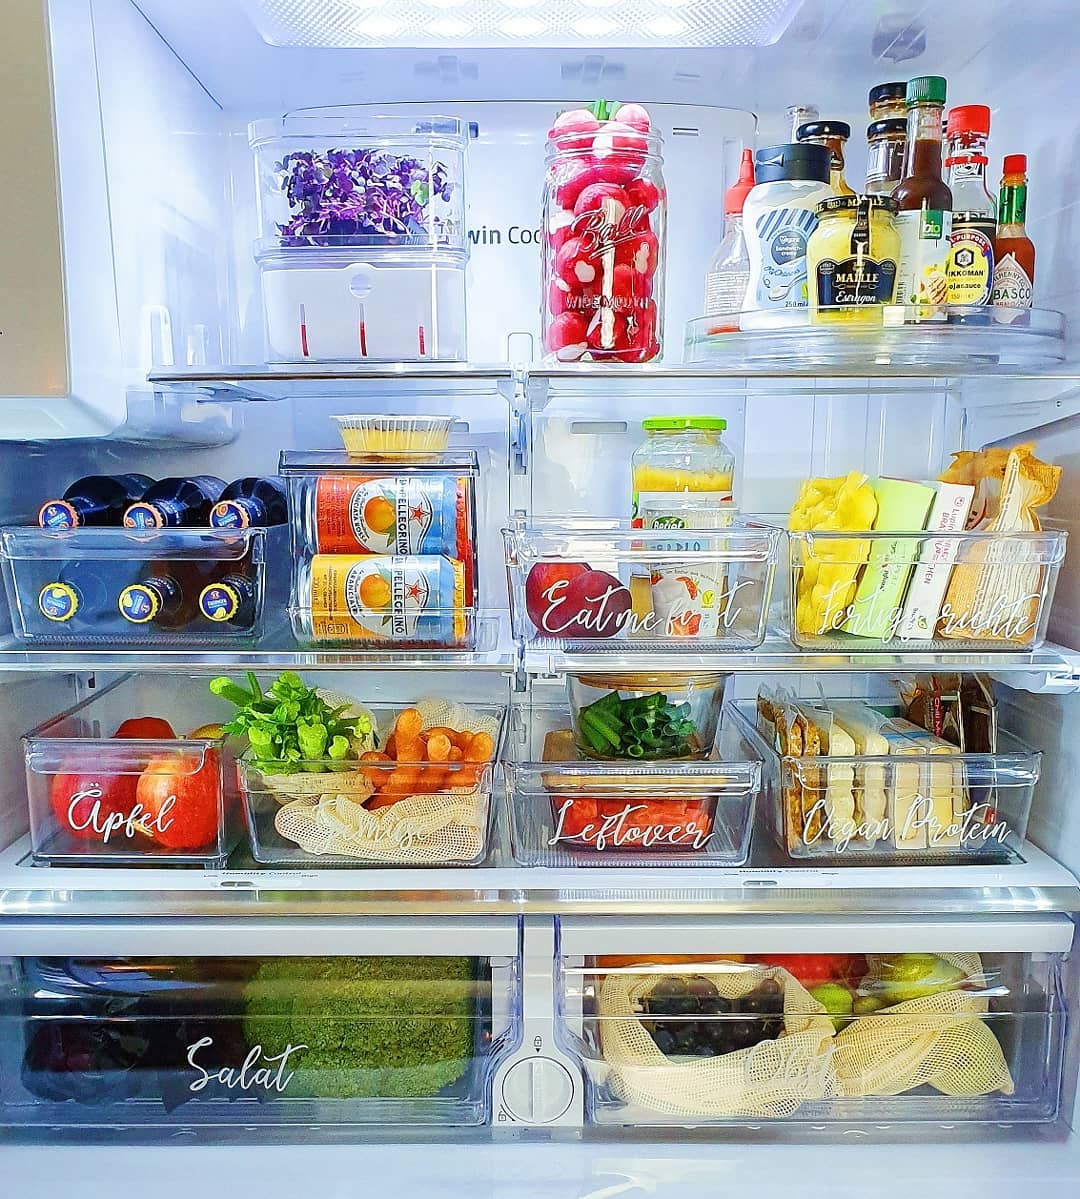 Organized fridge with labeled bins. Photo by Instagram user @thehomehabit